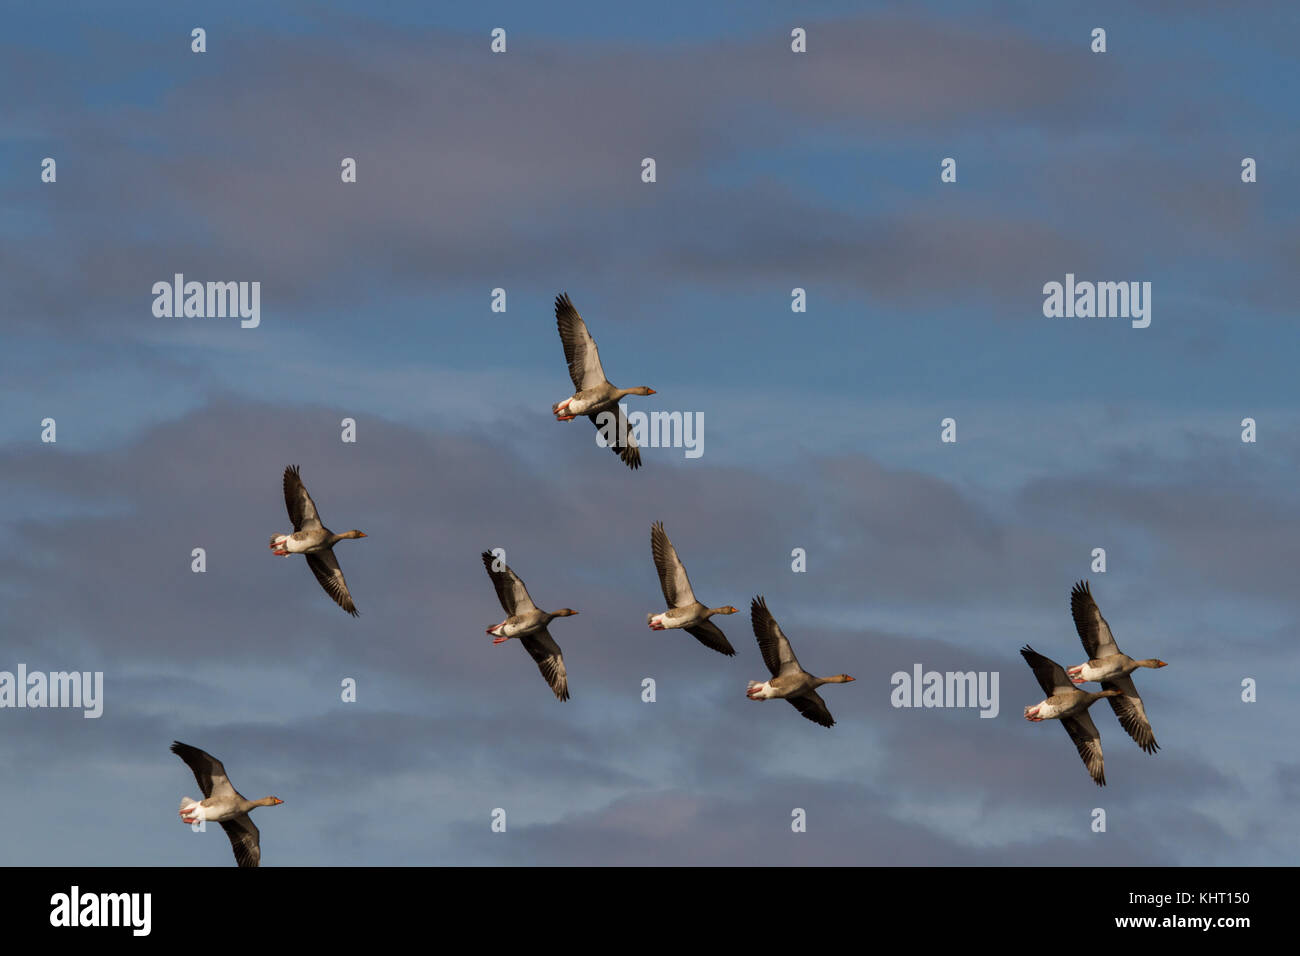 A flock of Greylag Geese (Anser anser) in flight Stock Photo